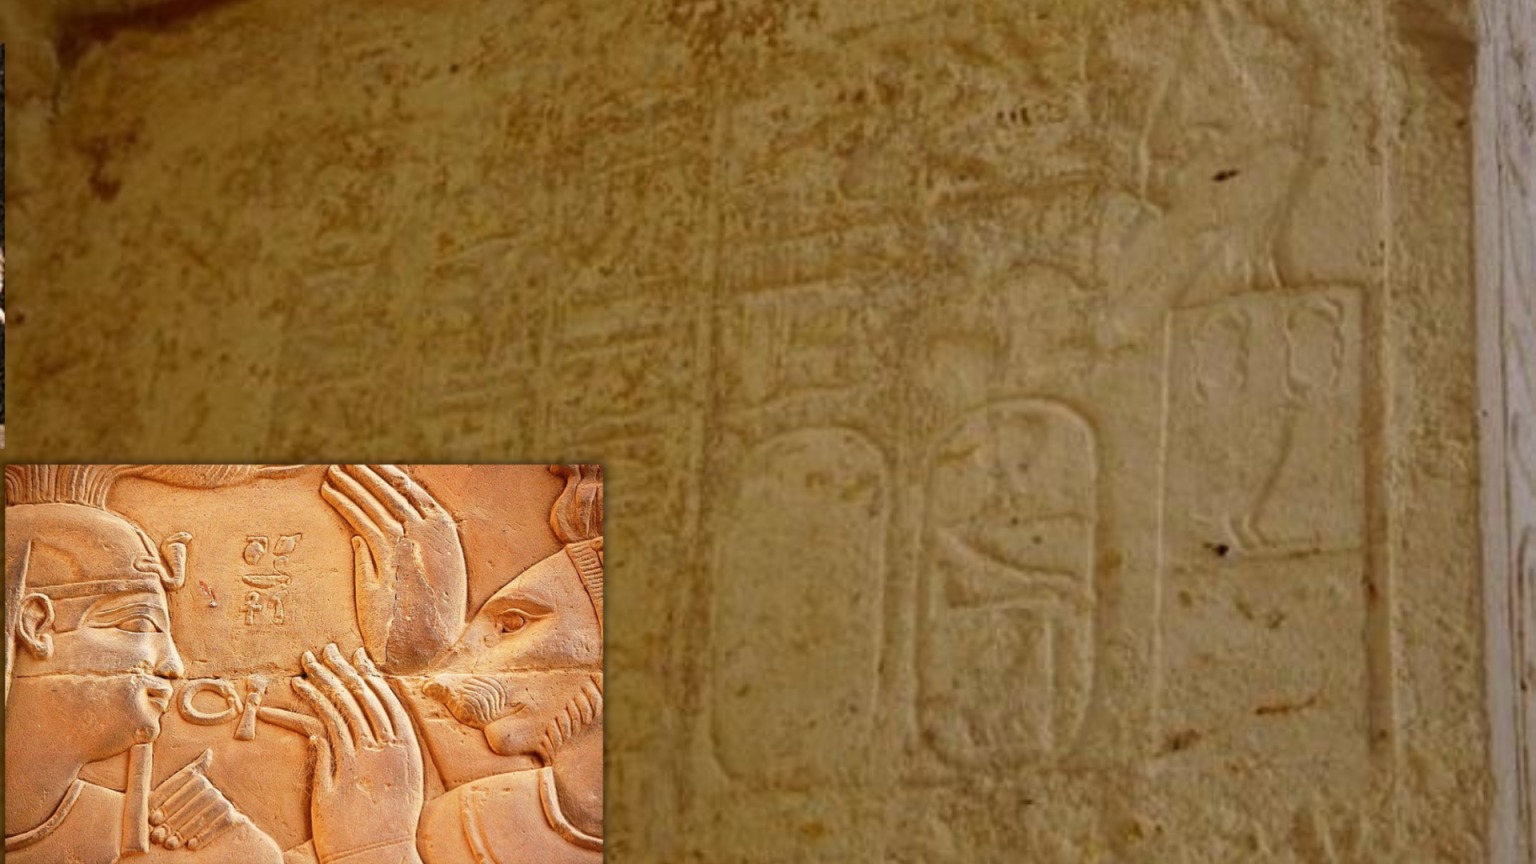 4,000-Year-Old Relief Carvings and Decorated Stone Blocks Discovered in Temple of Serapis in Egypt